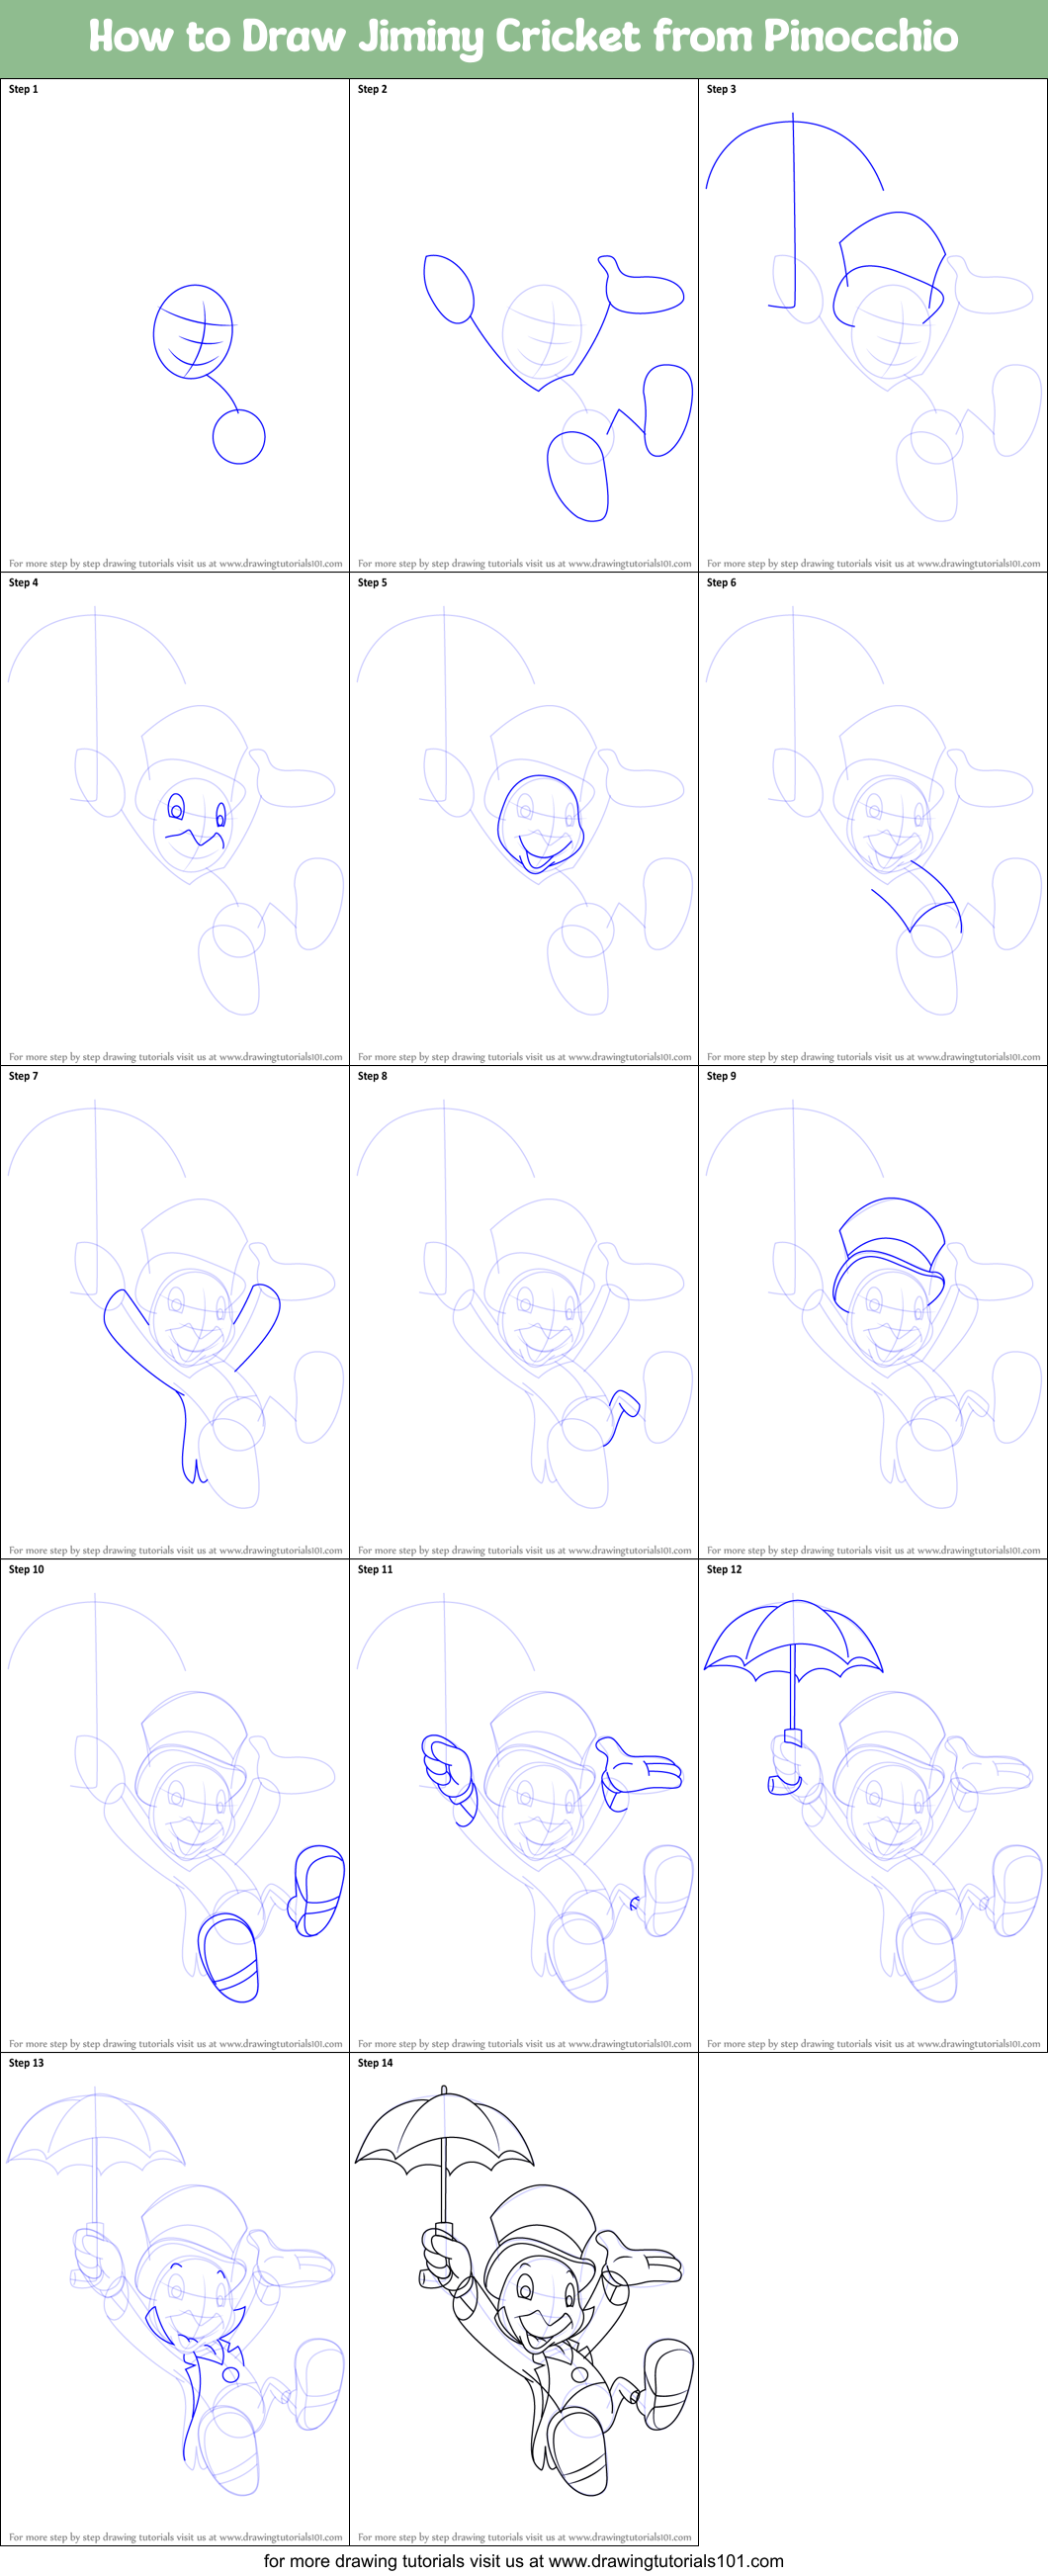 How To Draw Jiminy Cricket From Pinocchio Printable Step By Step